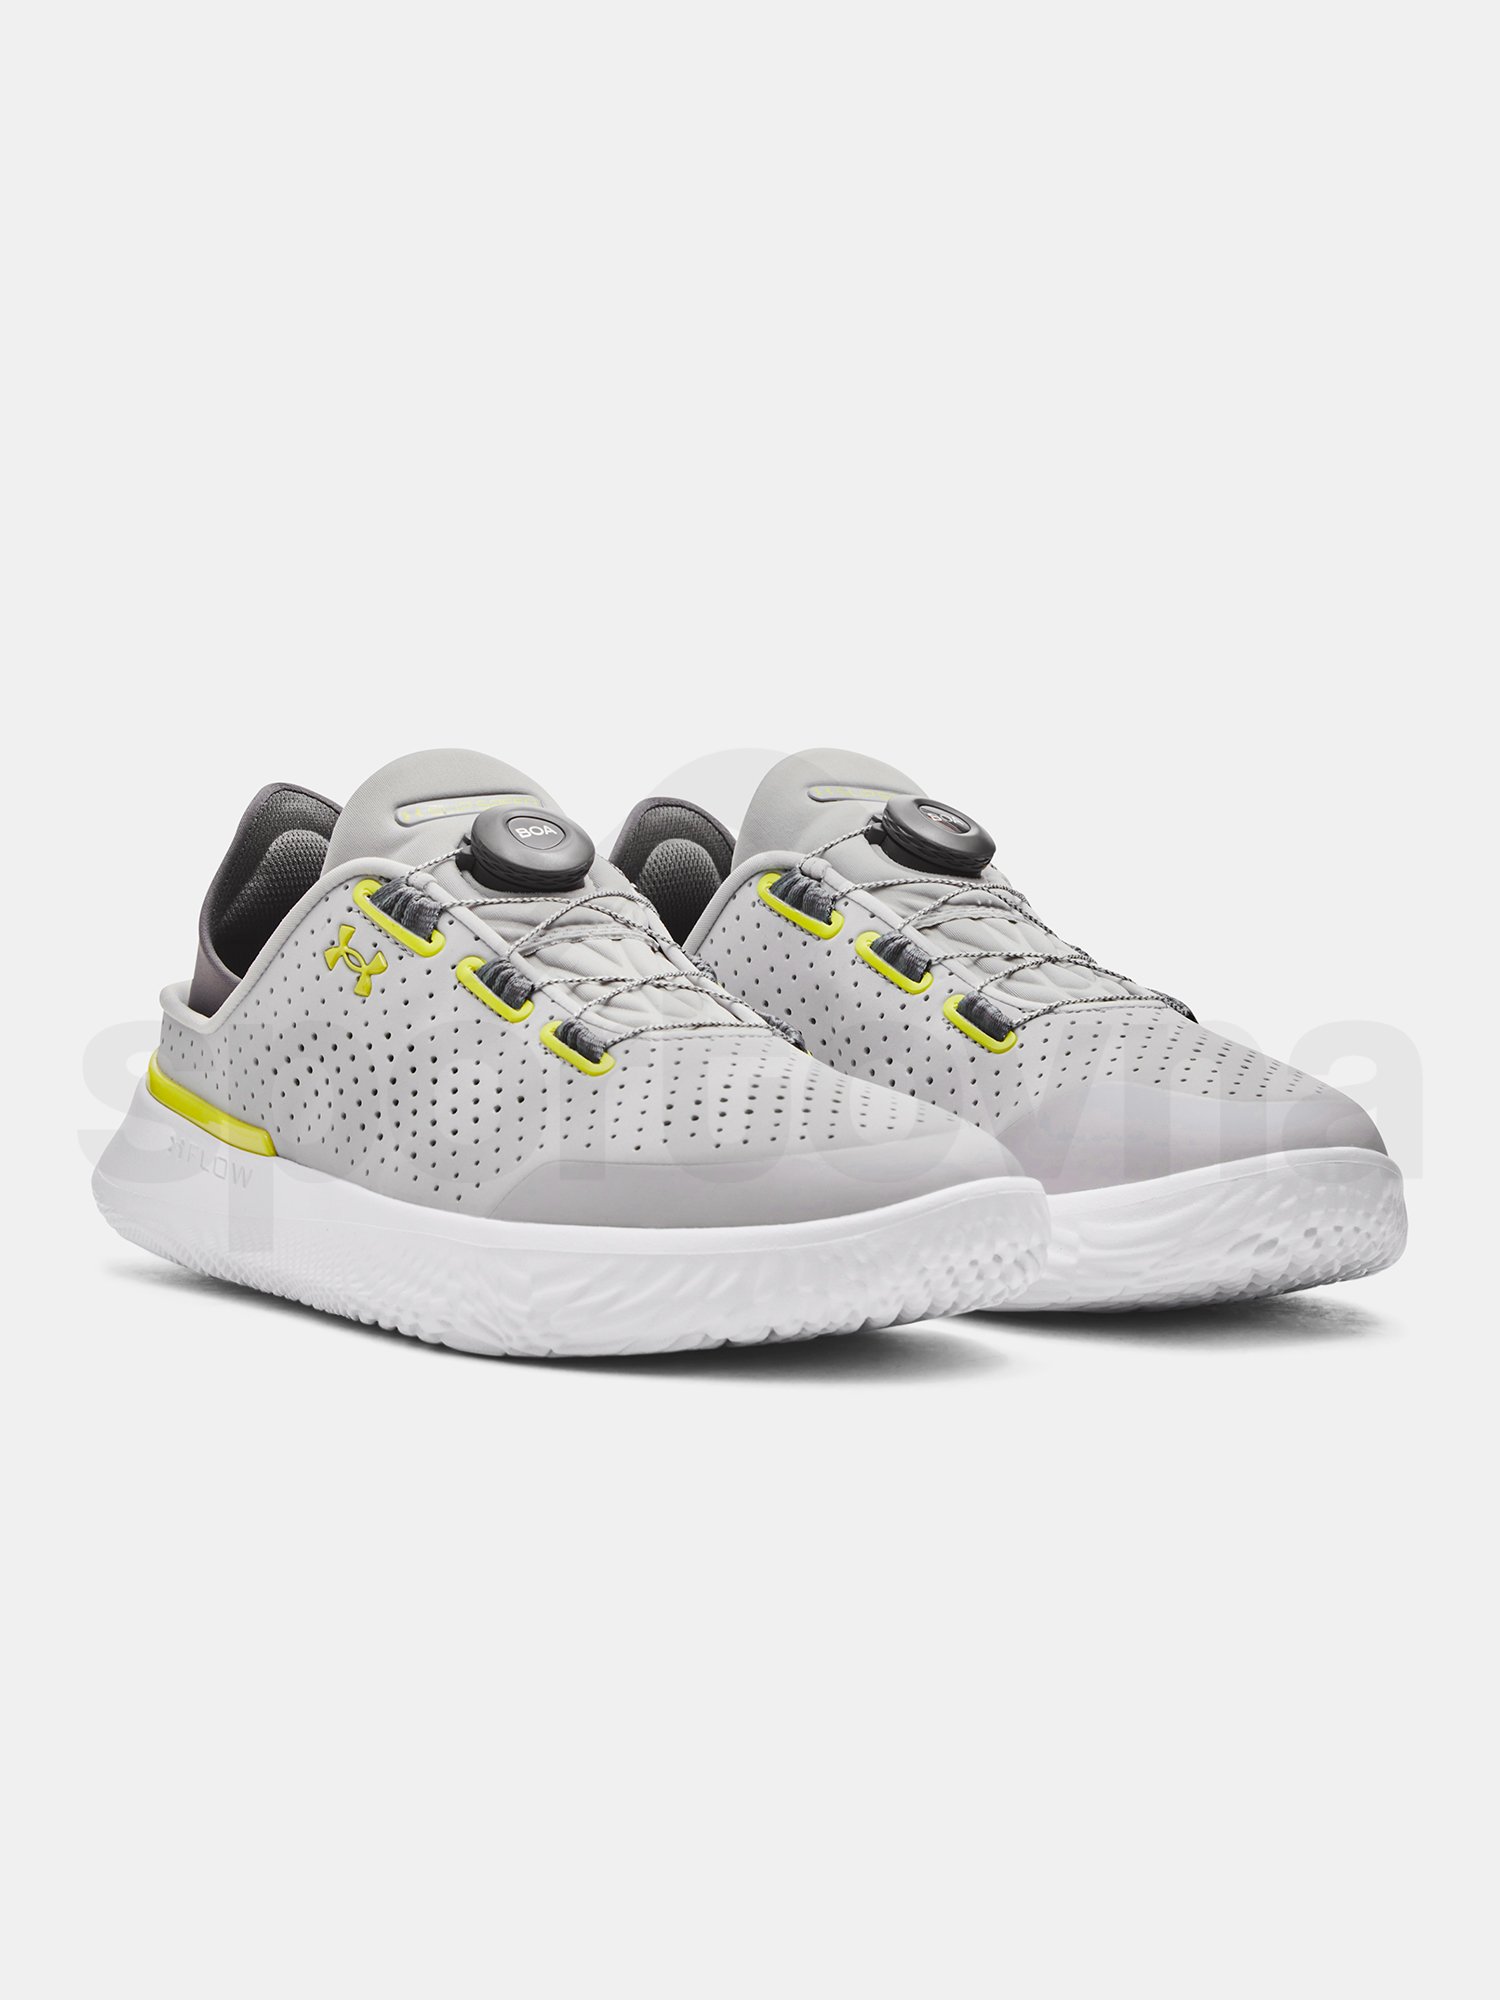 Boty Under Armour UA Slipspeed Trainer NB-GRY